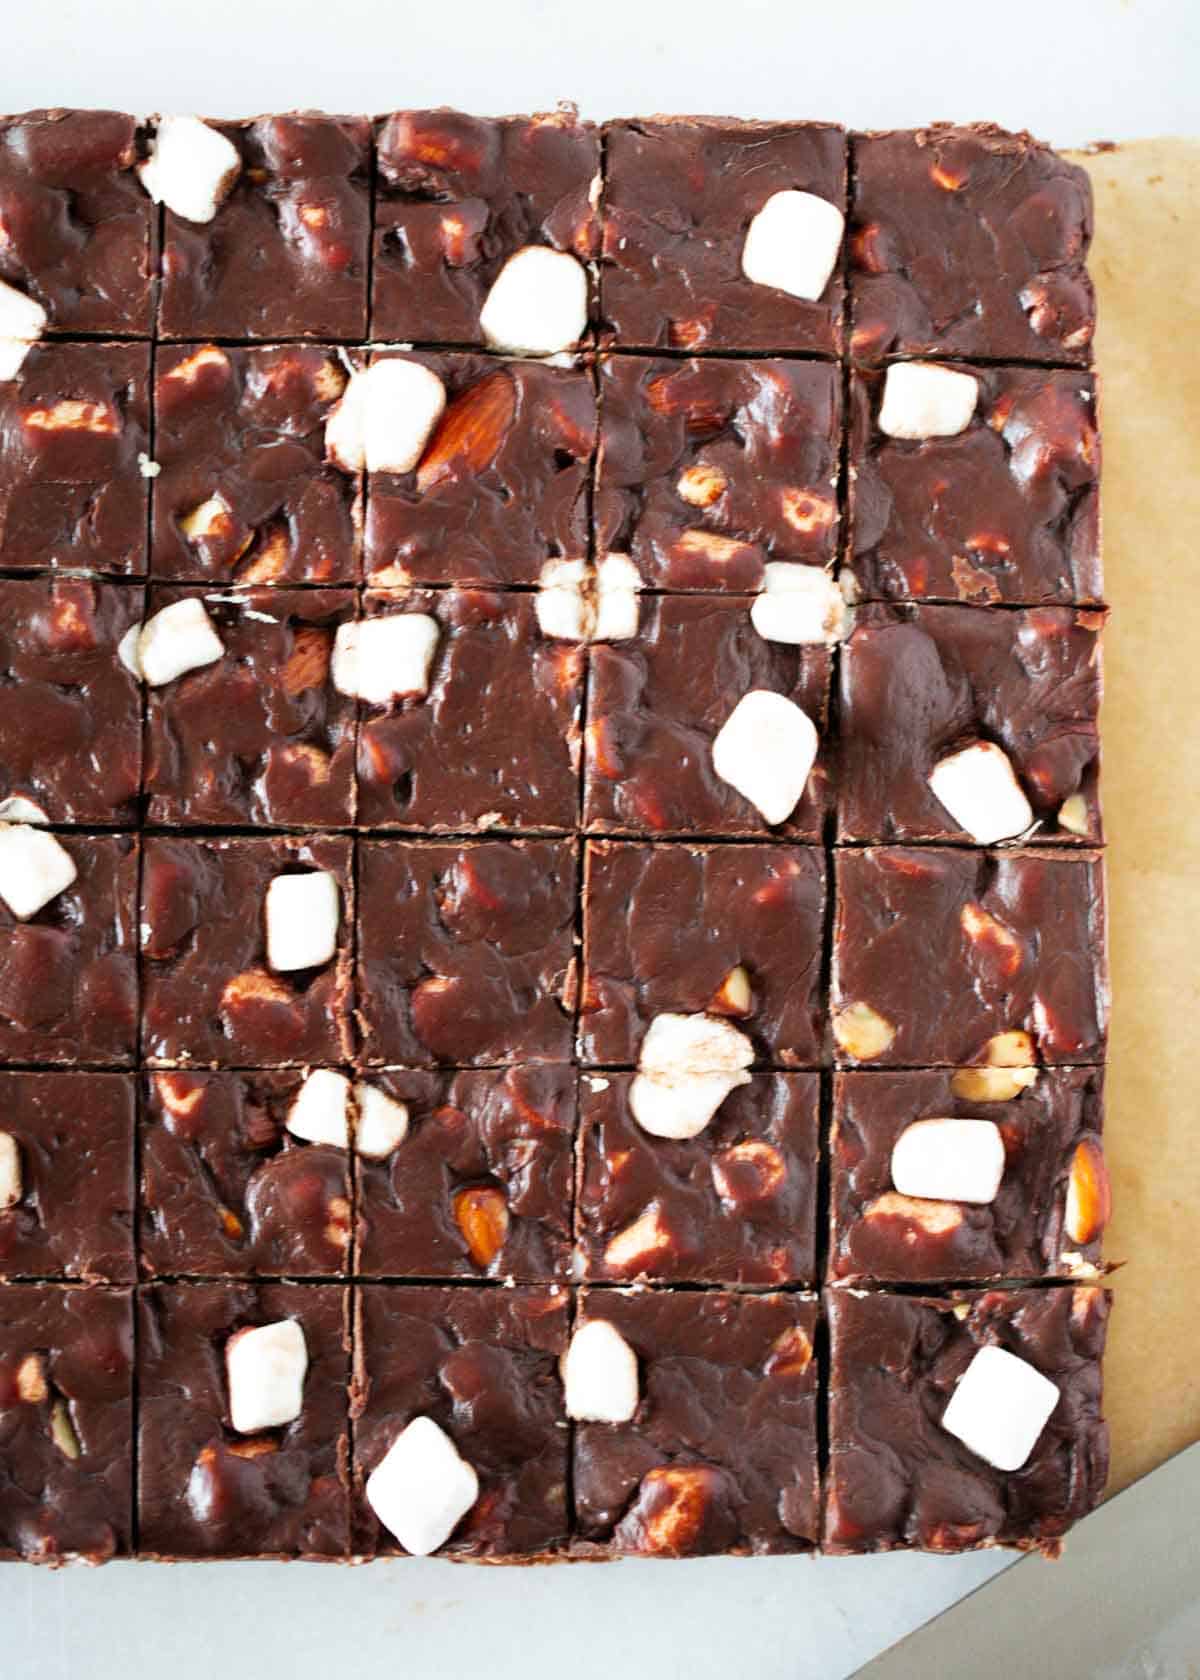 Sliced rocky road fudge in a pan.